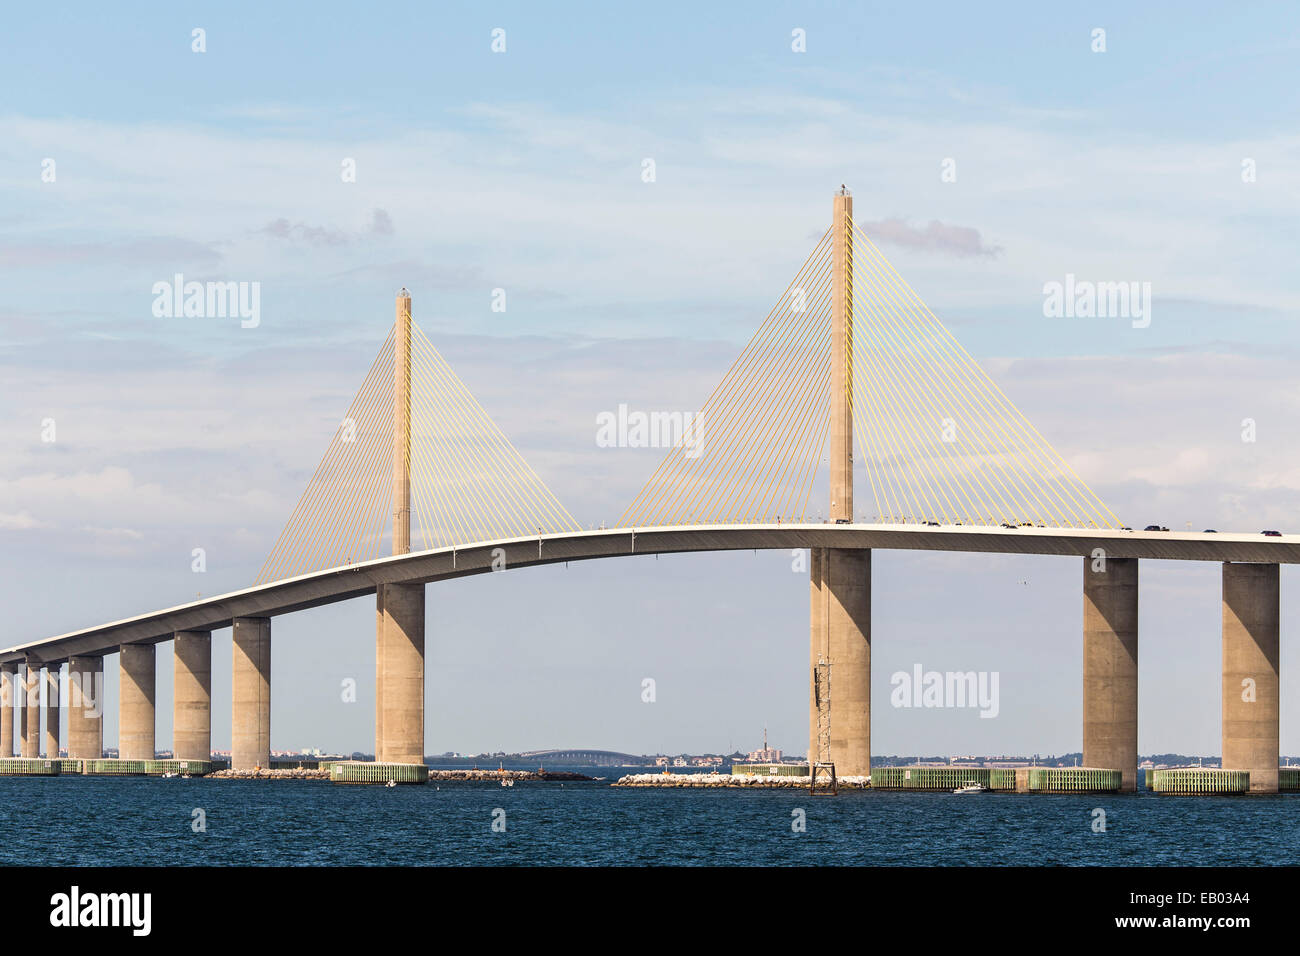 The Bob Graham Sunshine Skyway Bridge spans Tampa Bay, Florida, with a cable-stayed main span 4.1 miles long. Stock Photo